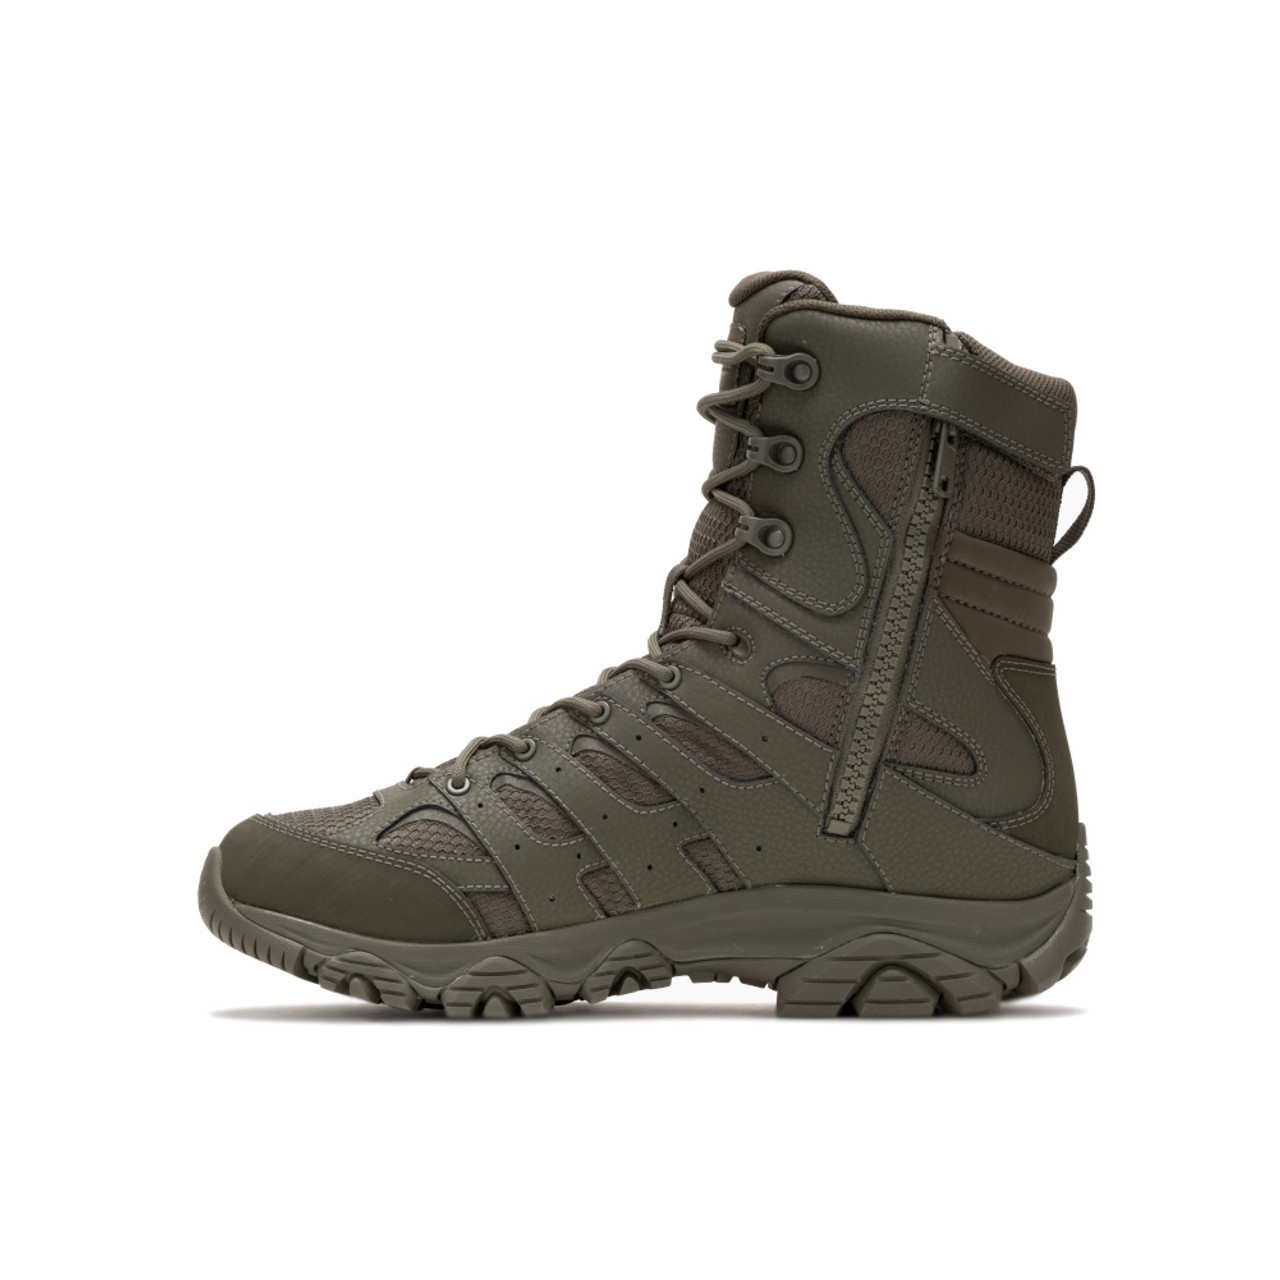 MERRELL Moab 3 8in Tactical Waterproof Boots J004107